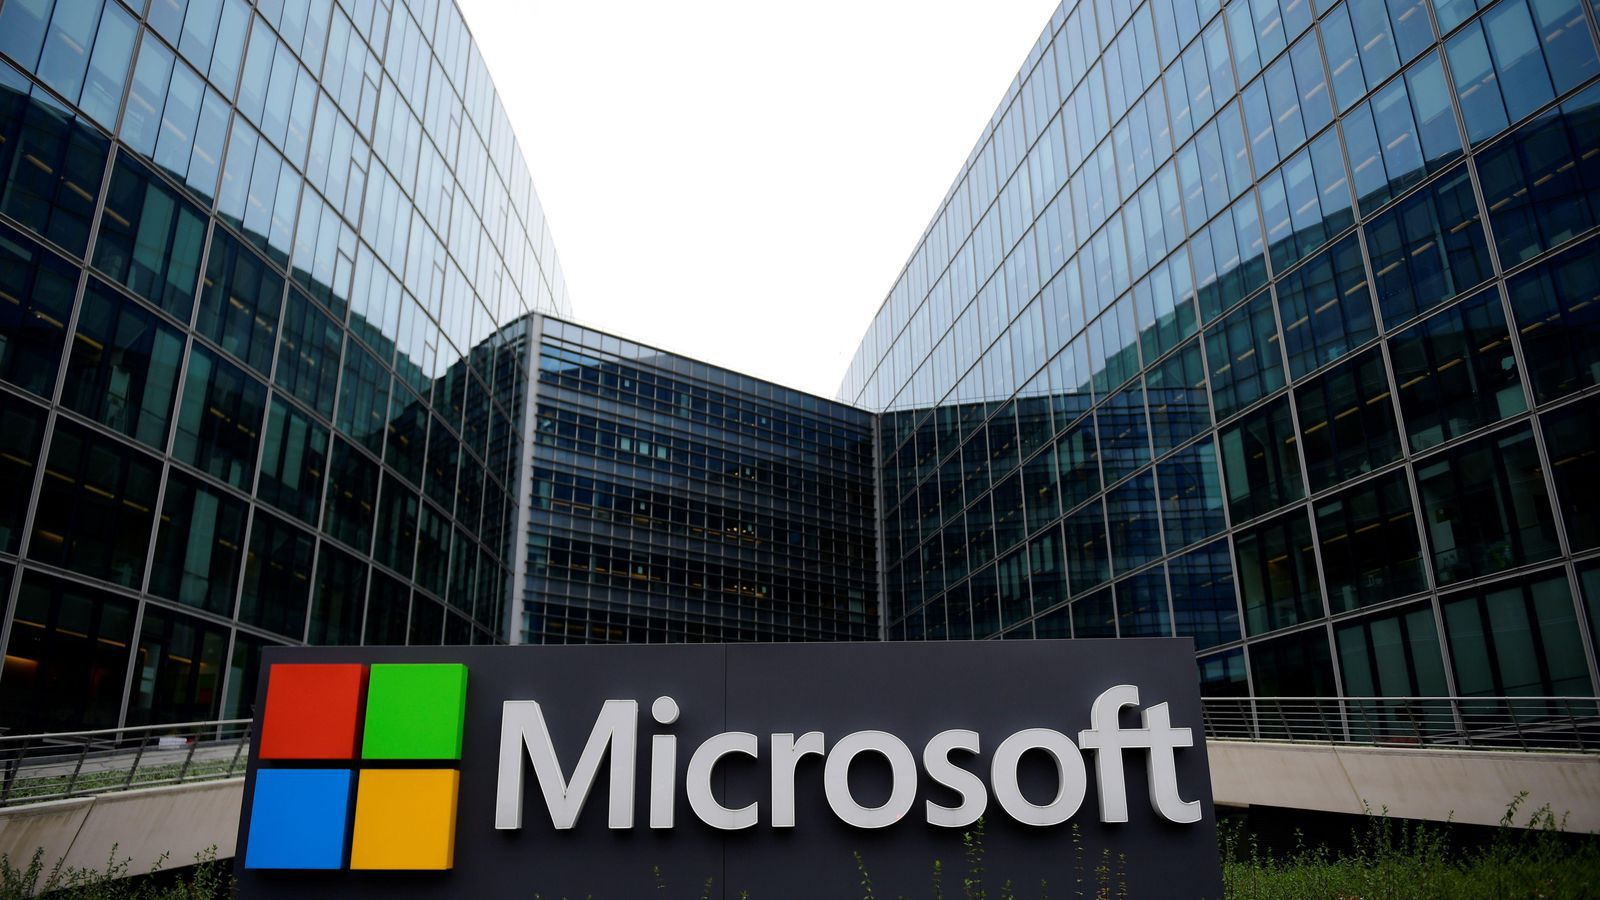 Microsoft briefly overtakes Apple as the most valuable US company